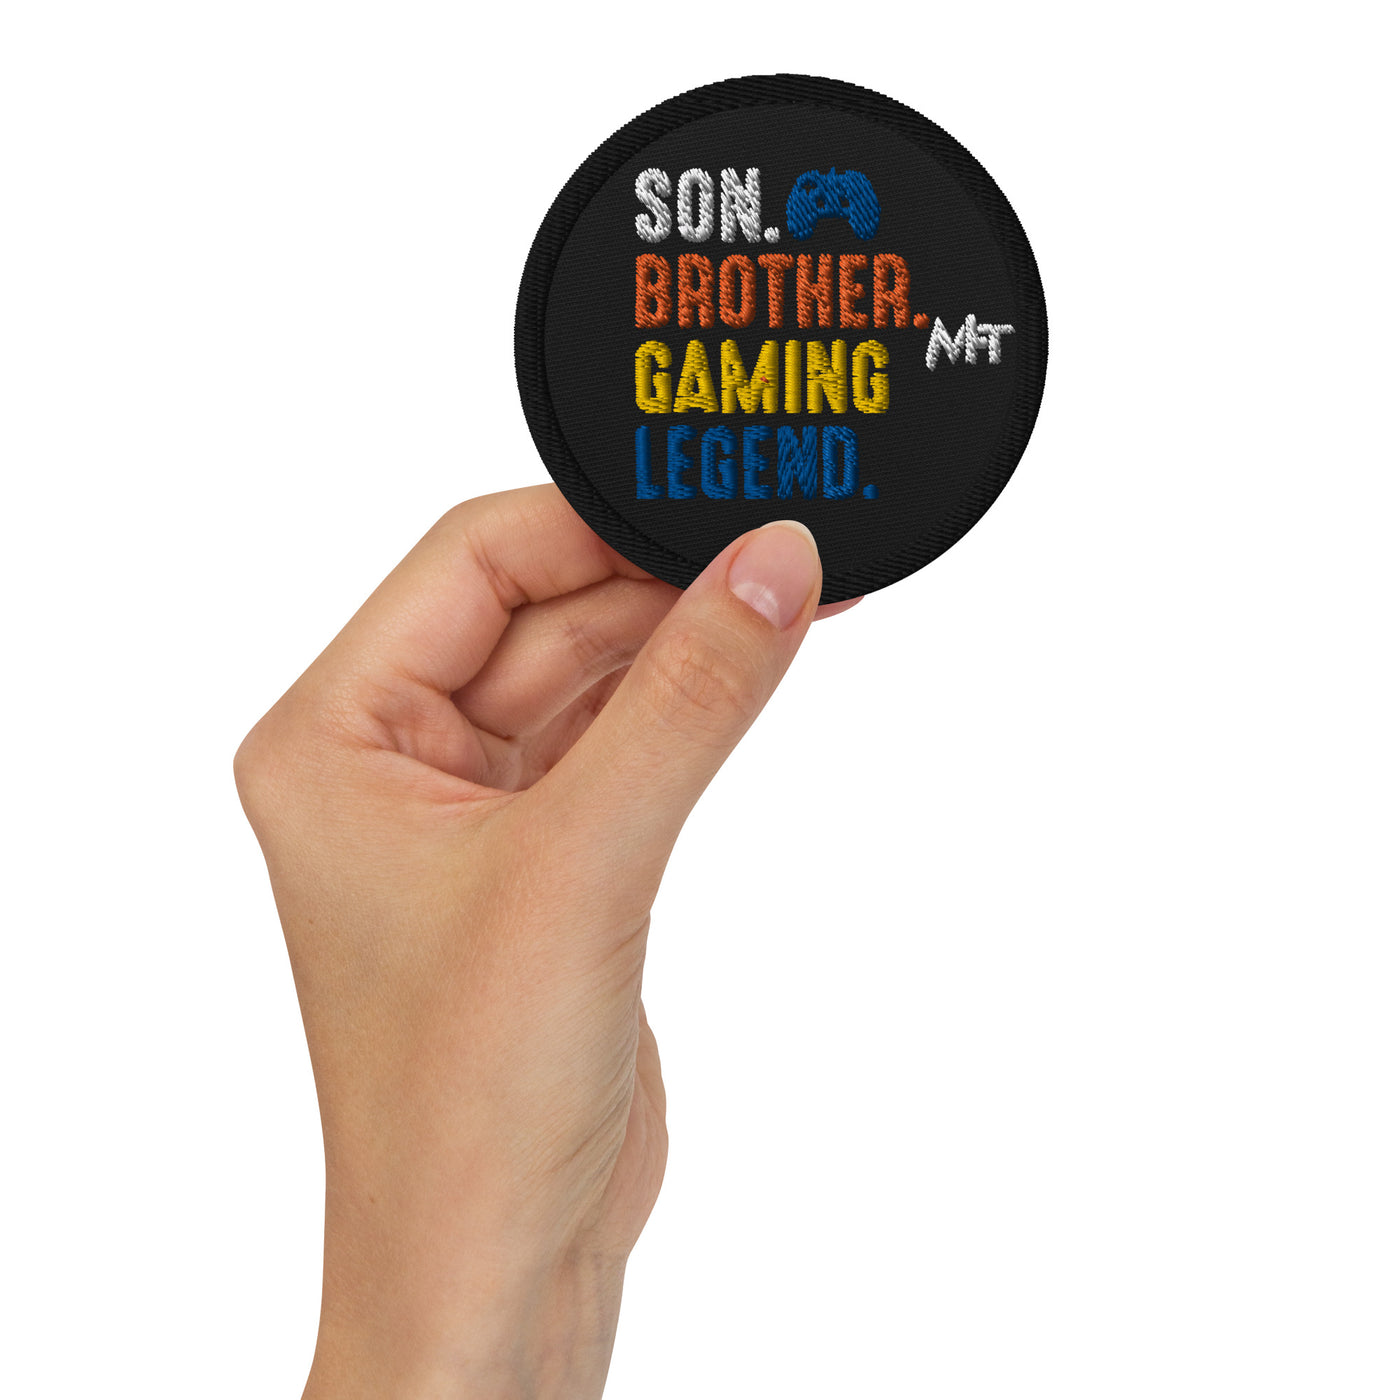 Son Brother Gaming Legend - Embroidered patches